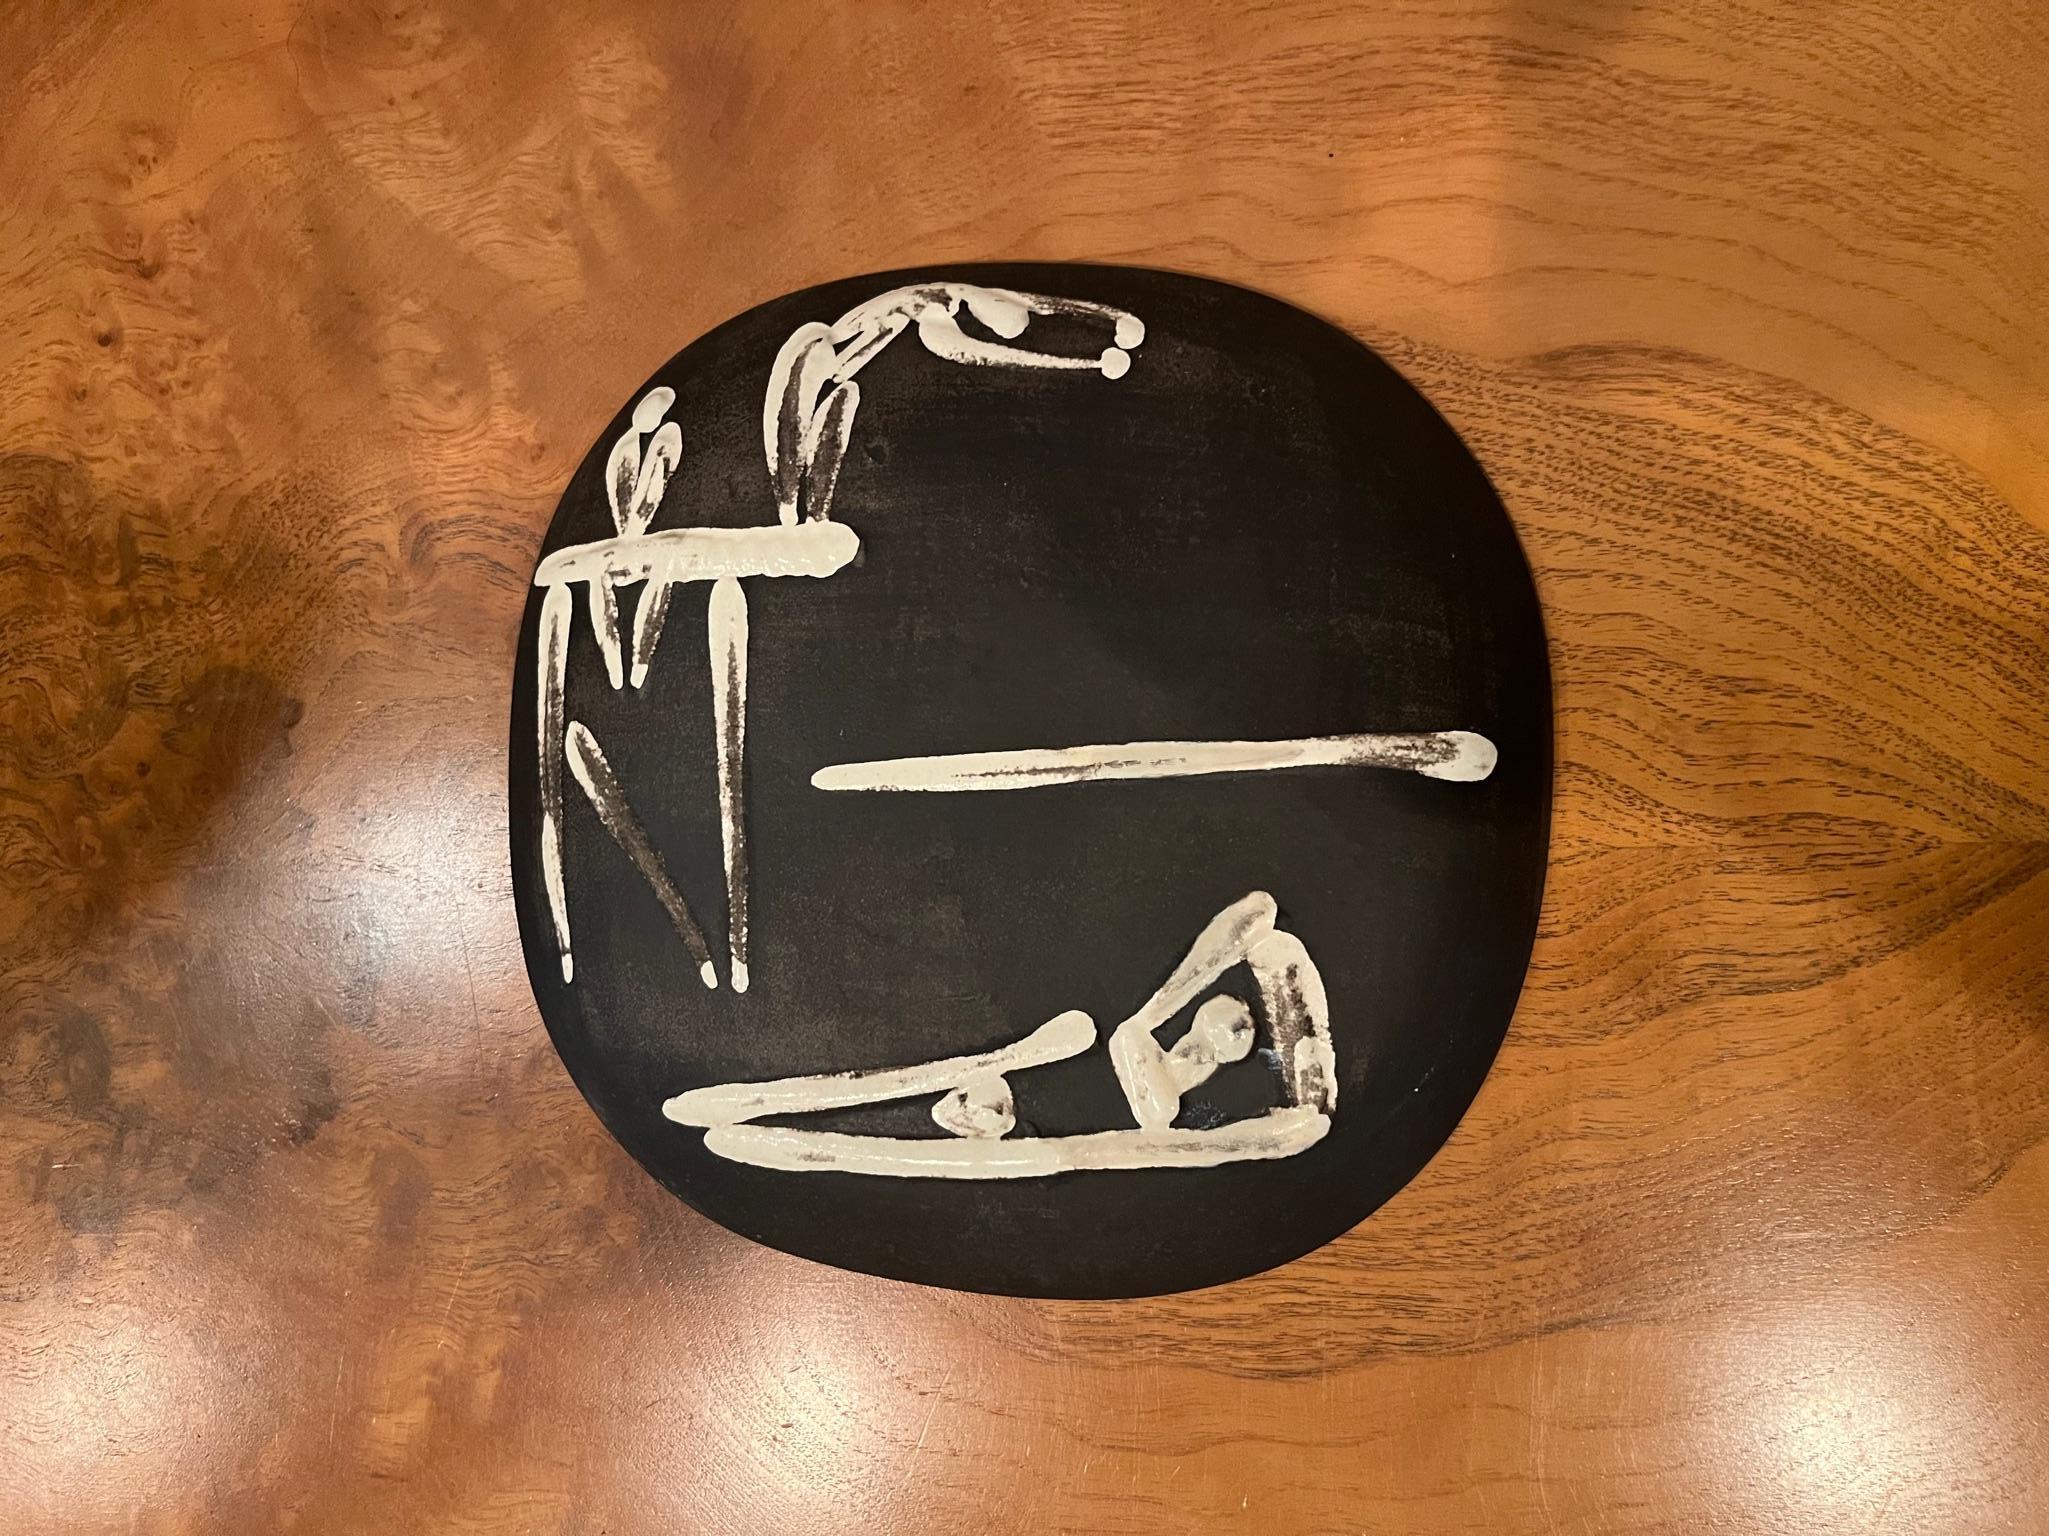 20th Century Pablo Picasso original signed limited edition Ceramic Plate, The Divers  1956